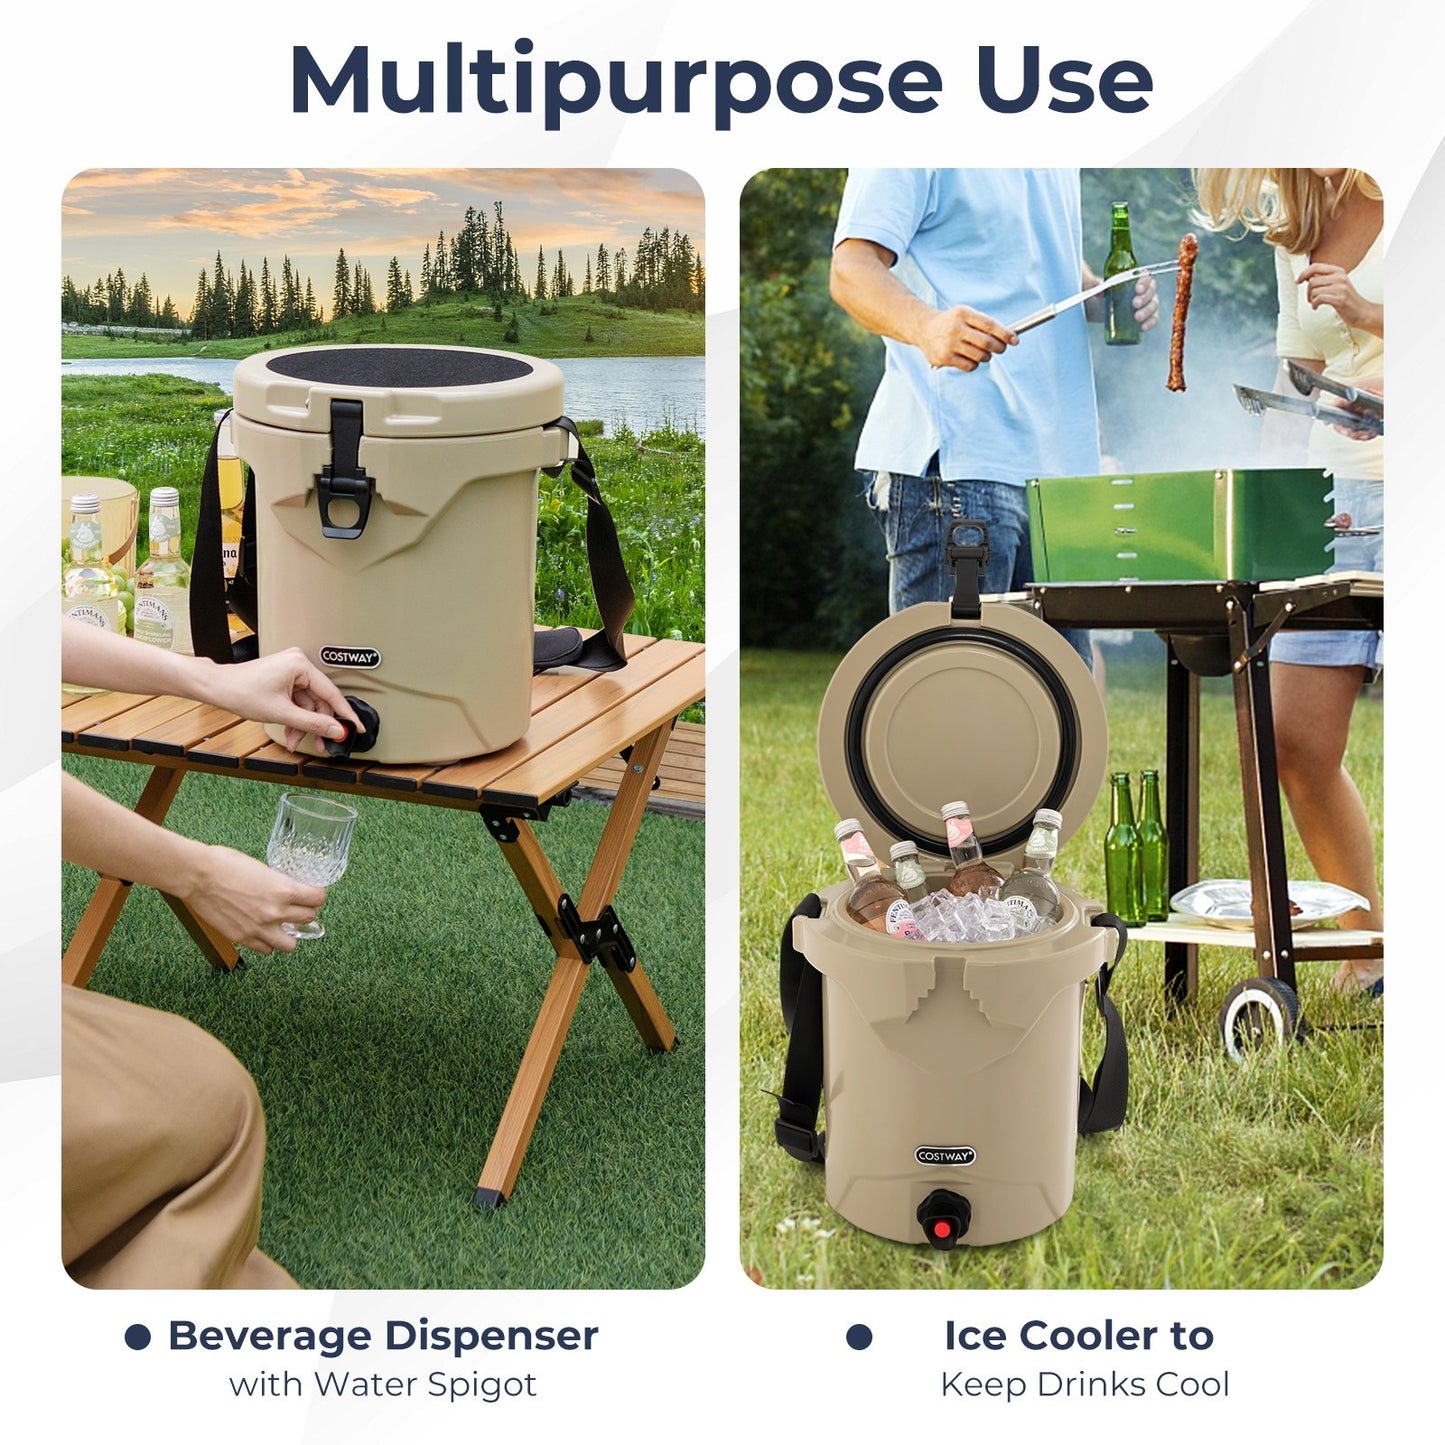 10 QT Drink Cooler Insulated Ice Chest with Spigot Flat Seat Lid and Adjustable Strap, Beige